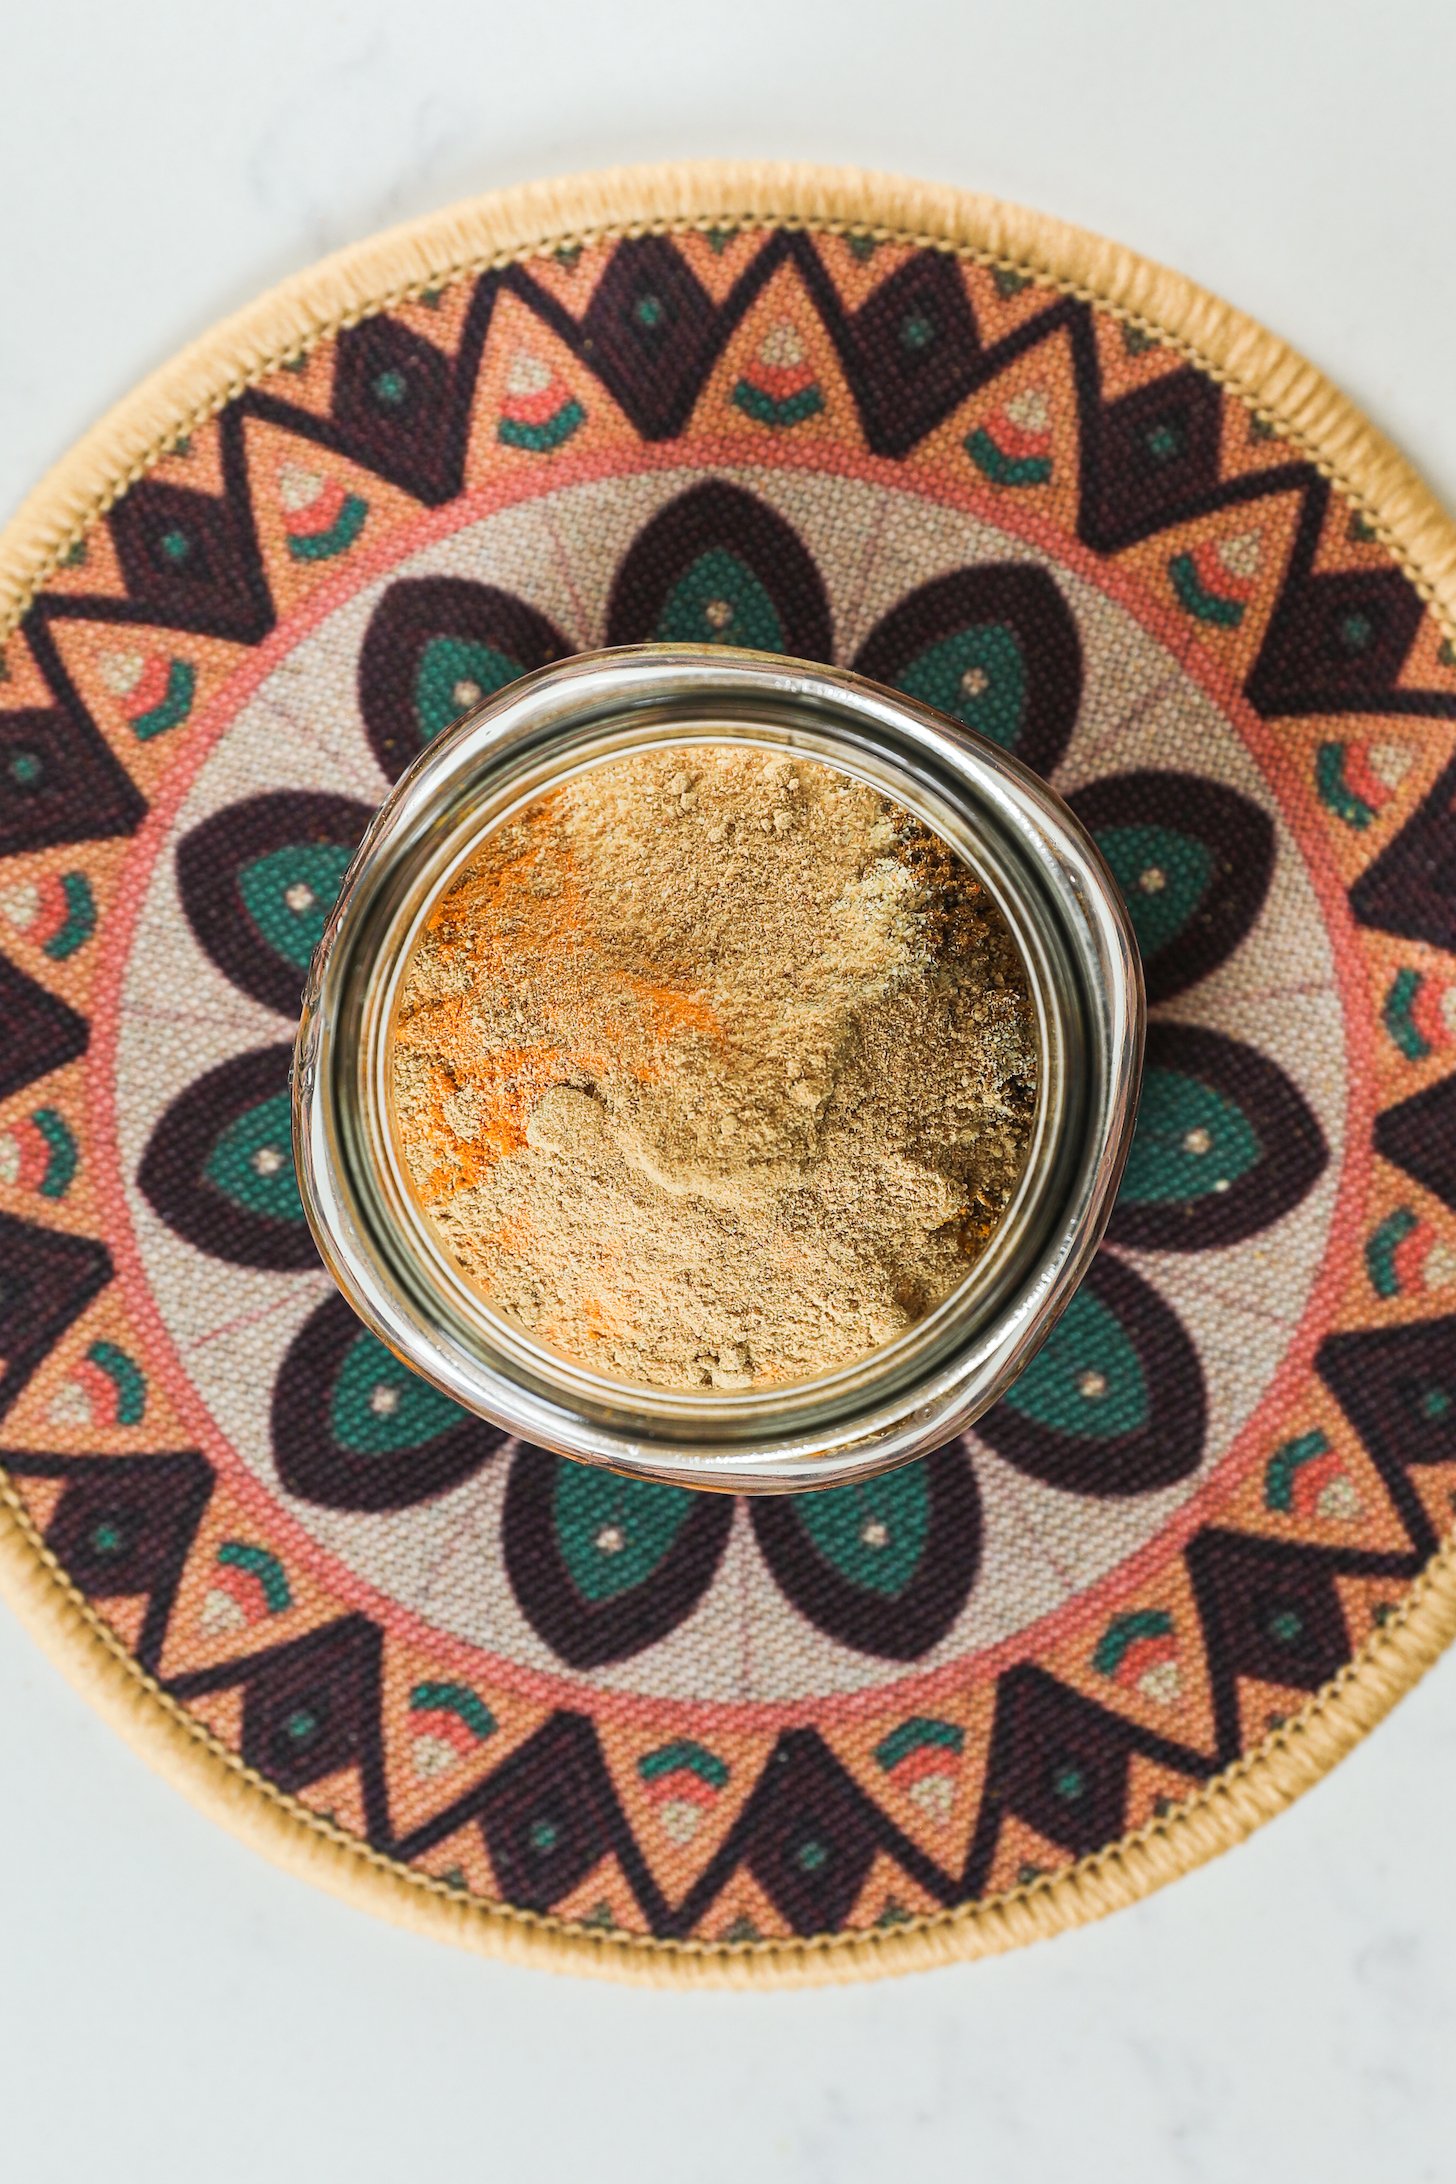 Top view of a jar with ground spices on a patterned placemat.